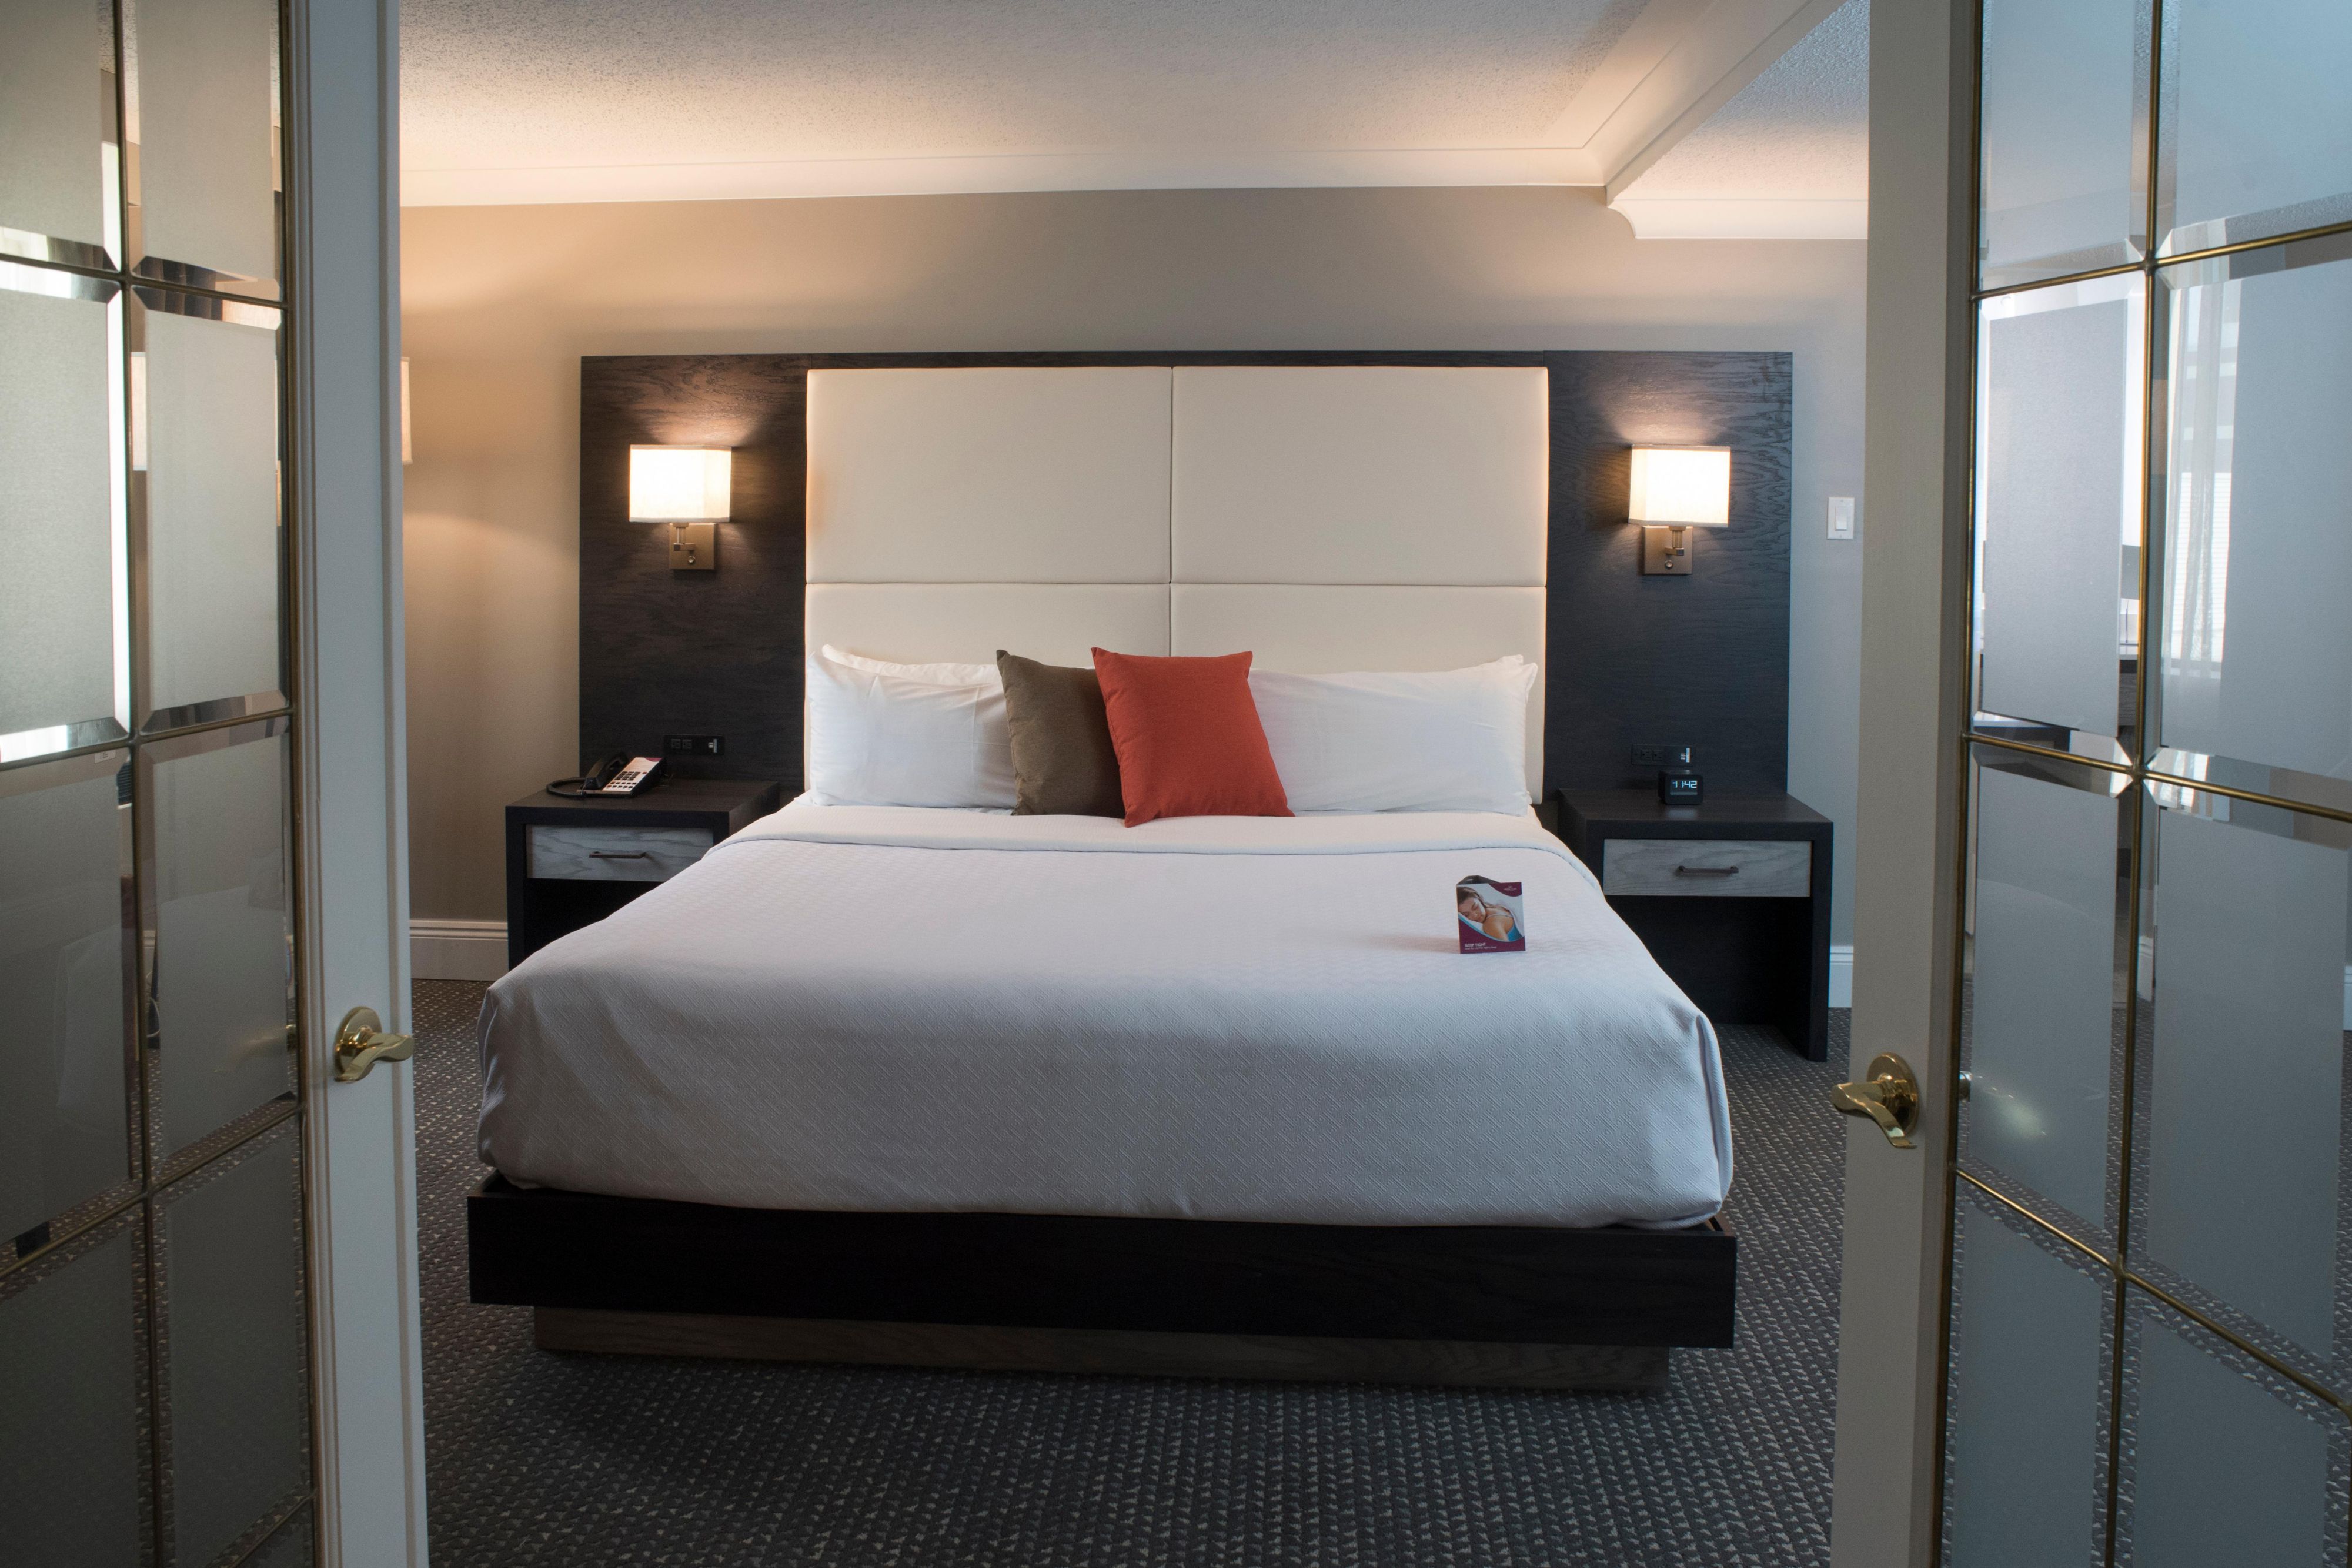 Indulge yourself in our warm, welcoming Lord Beaverbrook Suite